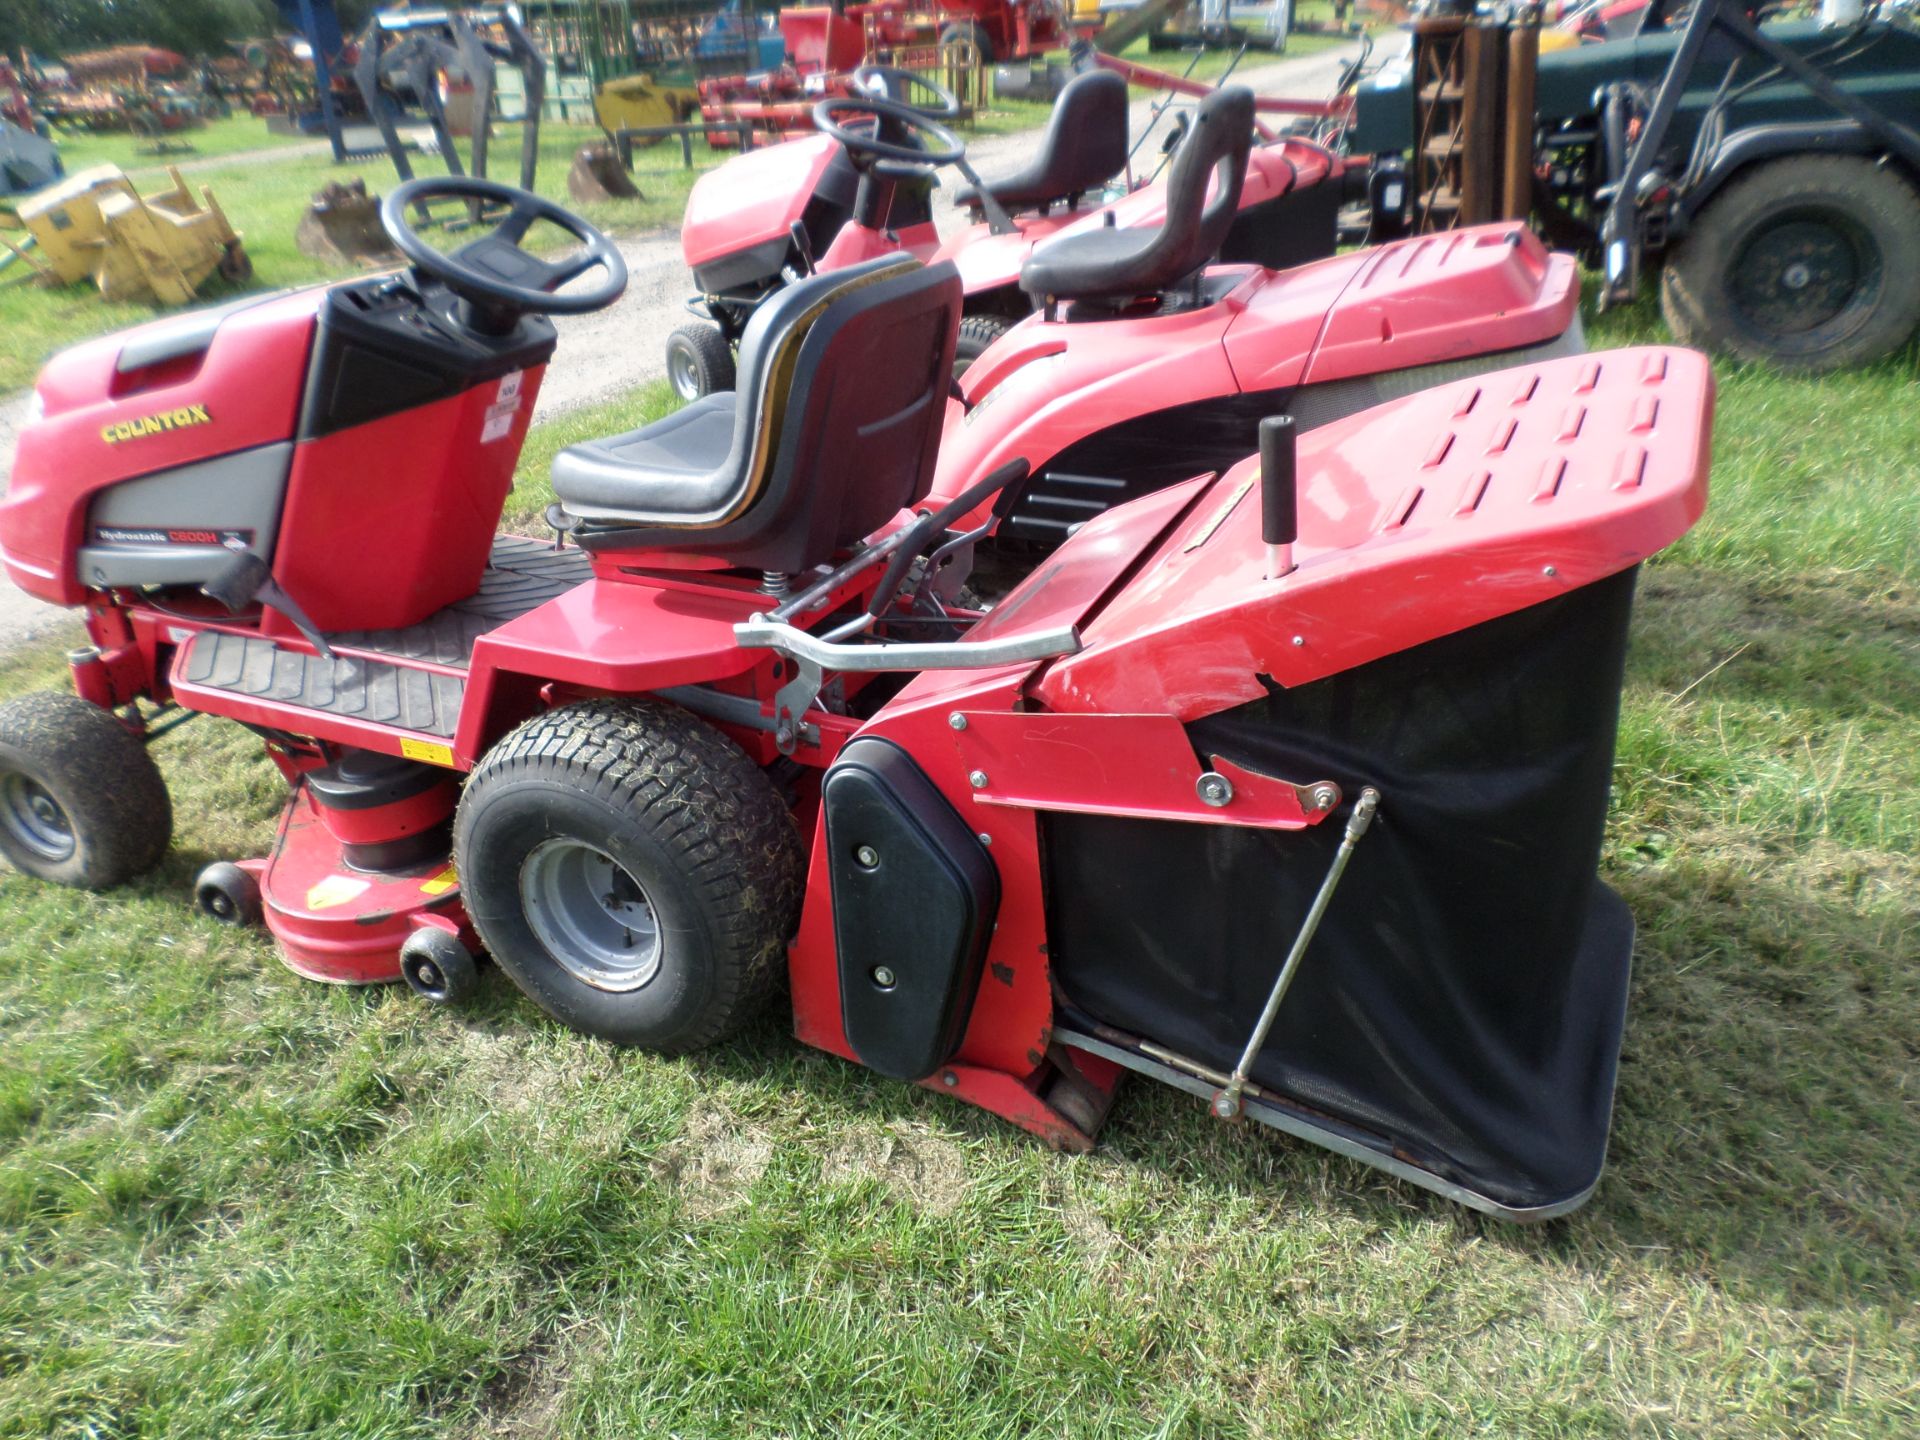 Countax C600H ride on mower, hydrostatic drive, 16HP twin cylinder engine, 38" cut c/w sweeper - Image 2 of 2